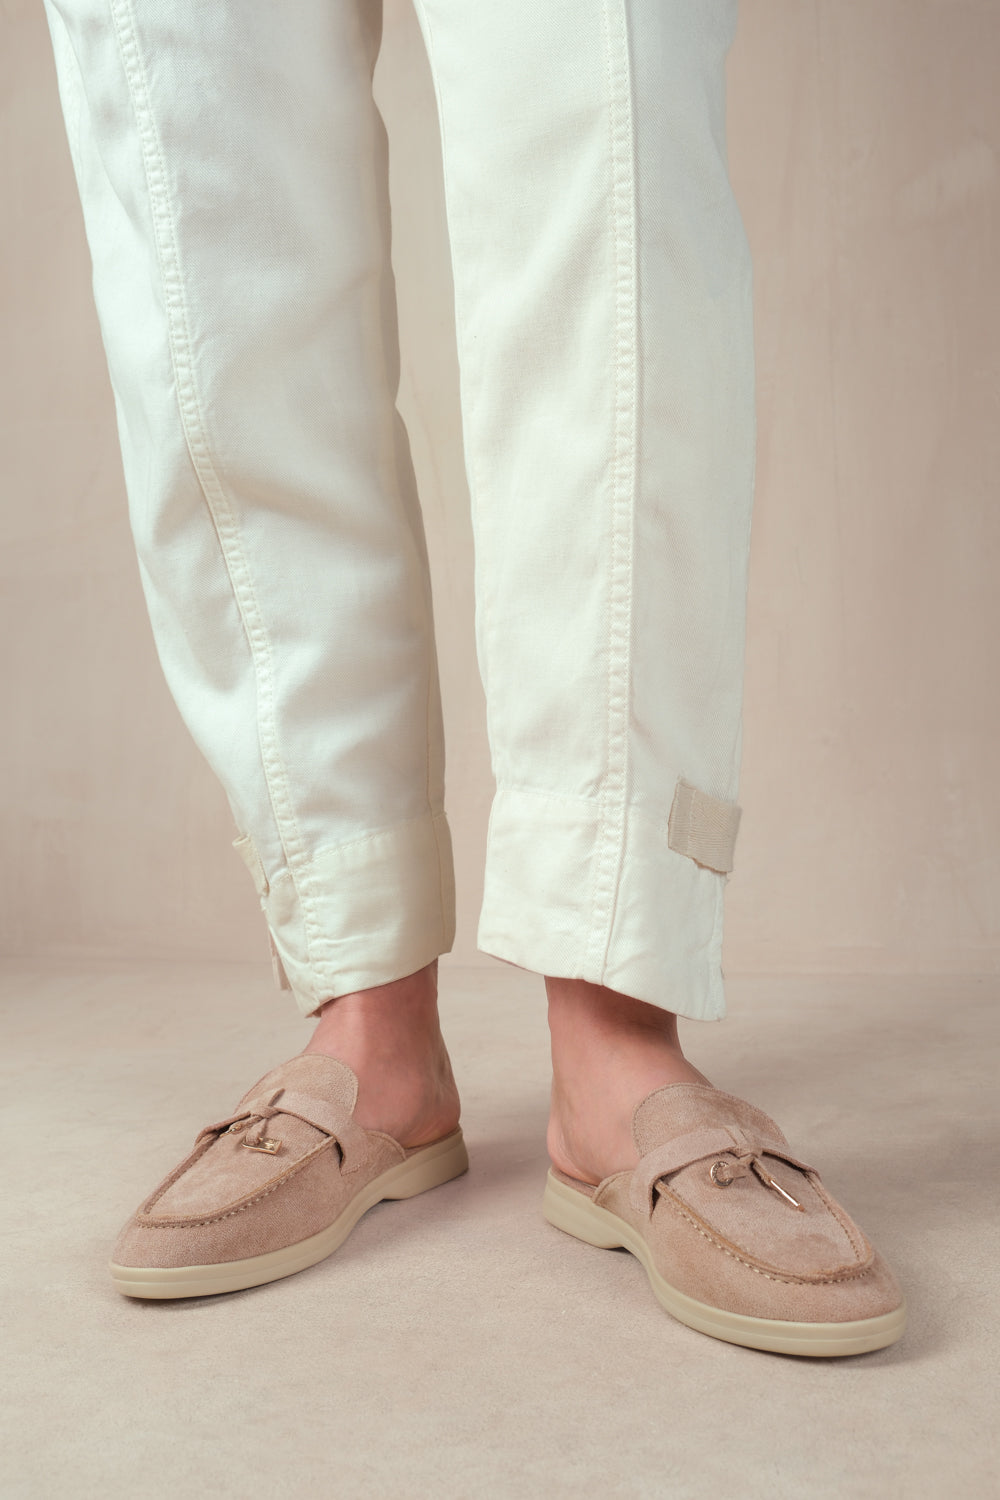 TWILIGHT FLAT SLIP ON LOAFER WITH TASSEL DETAIL IN KHAKI SUEDE